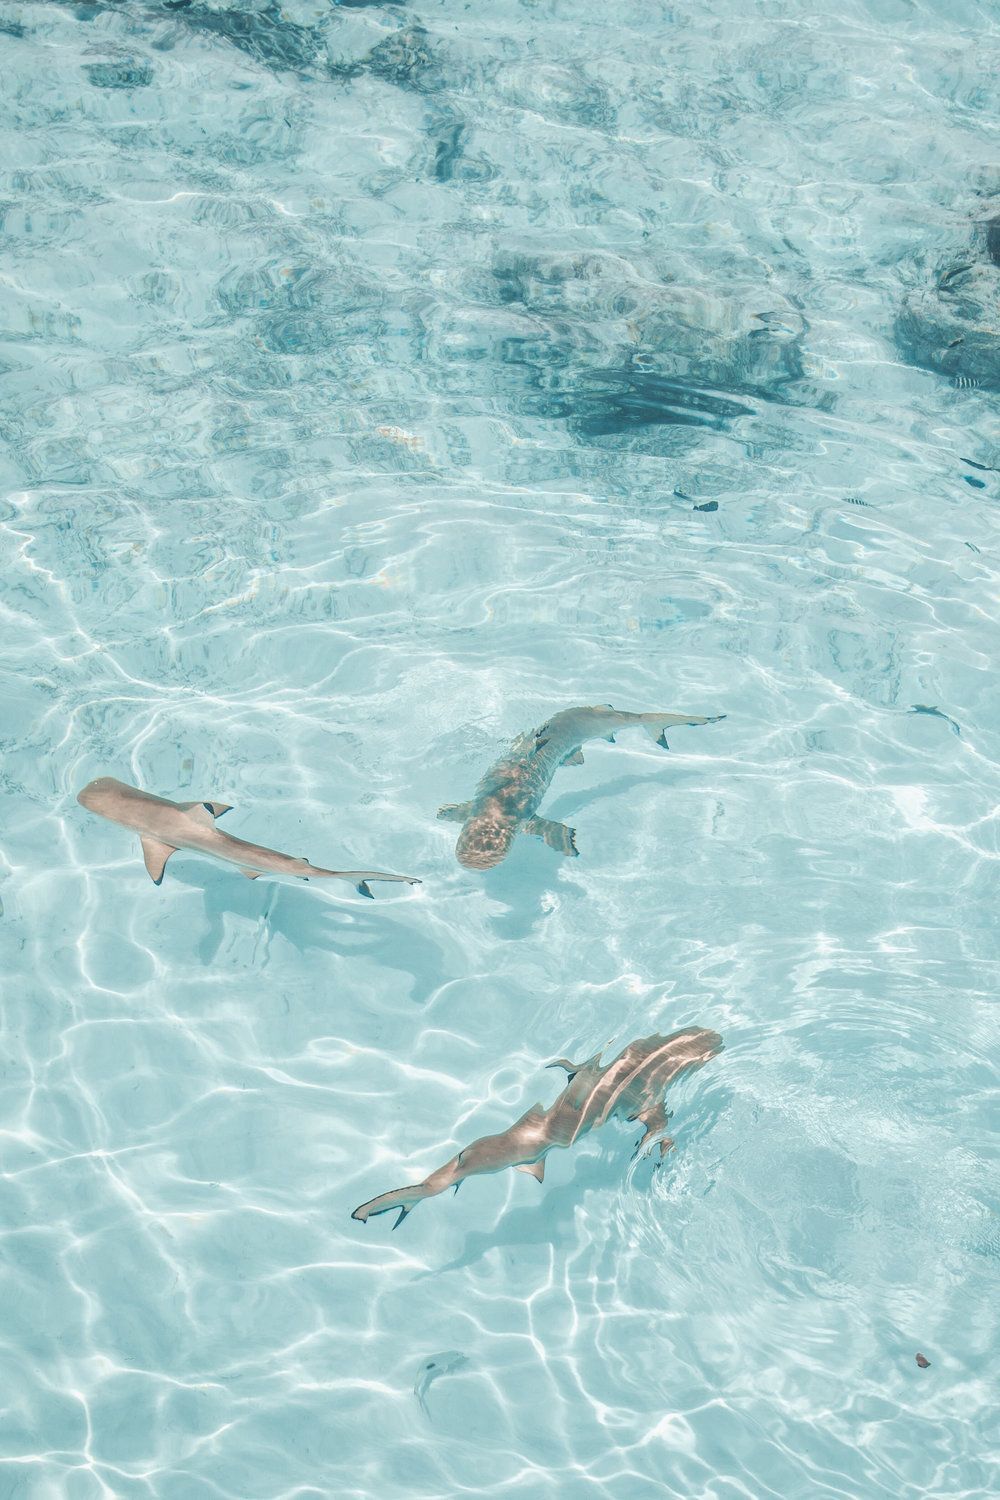 Sharks swimming in a pool - Underwater